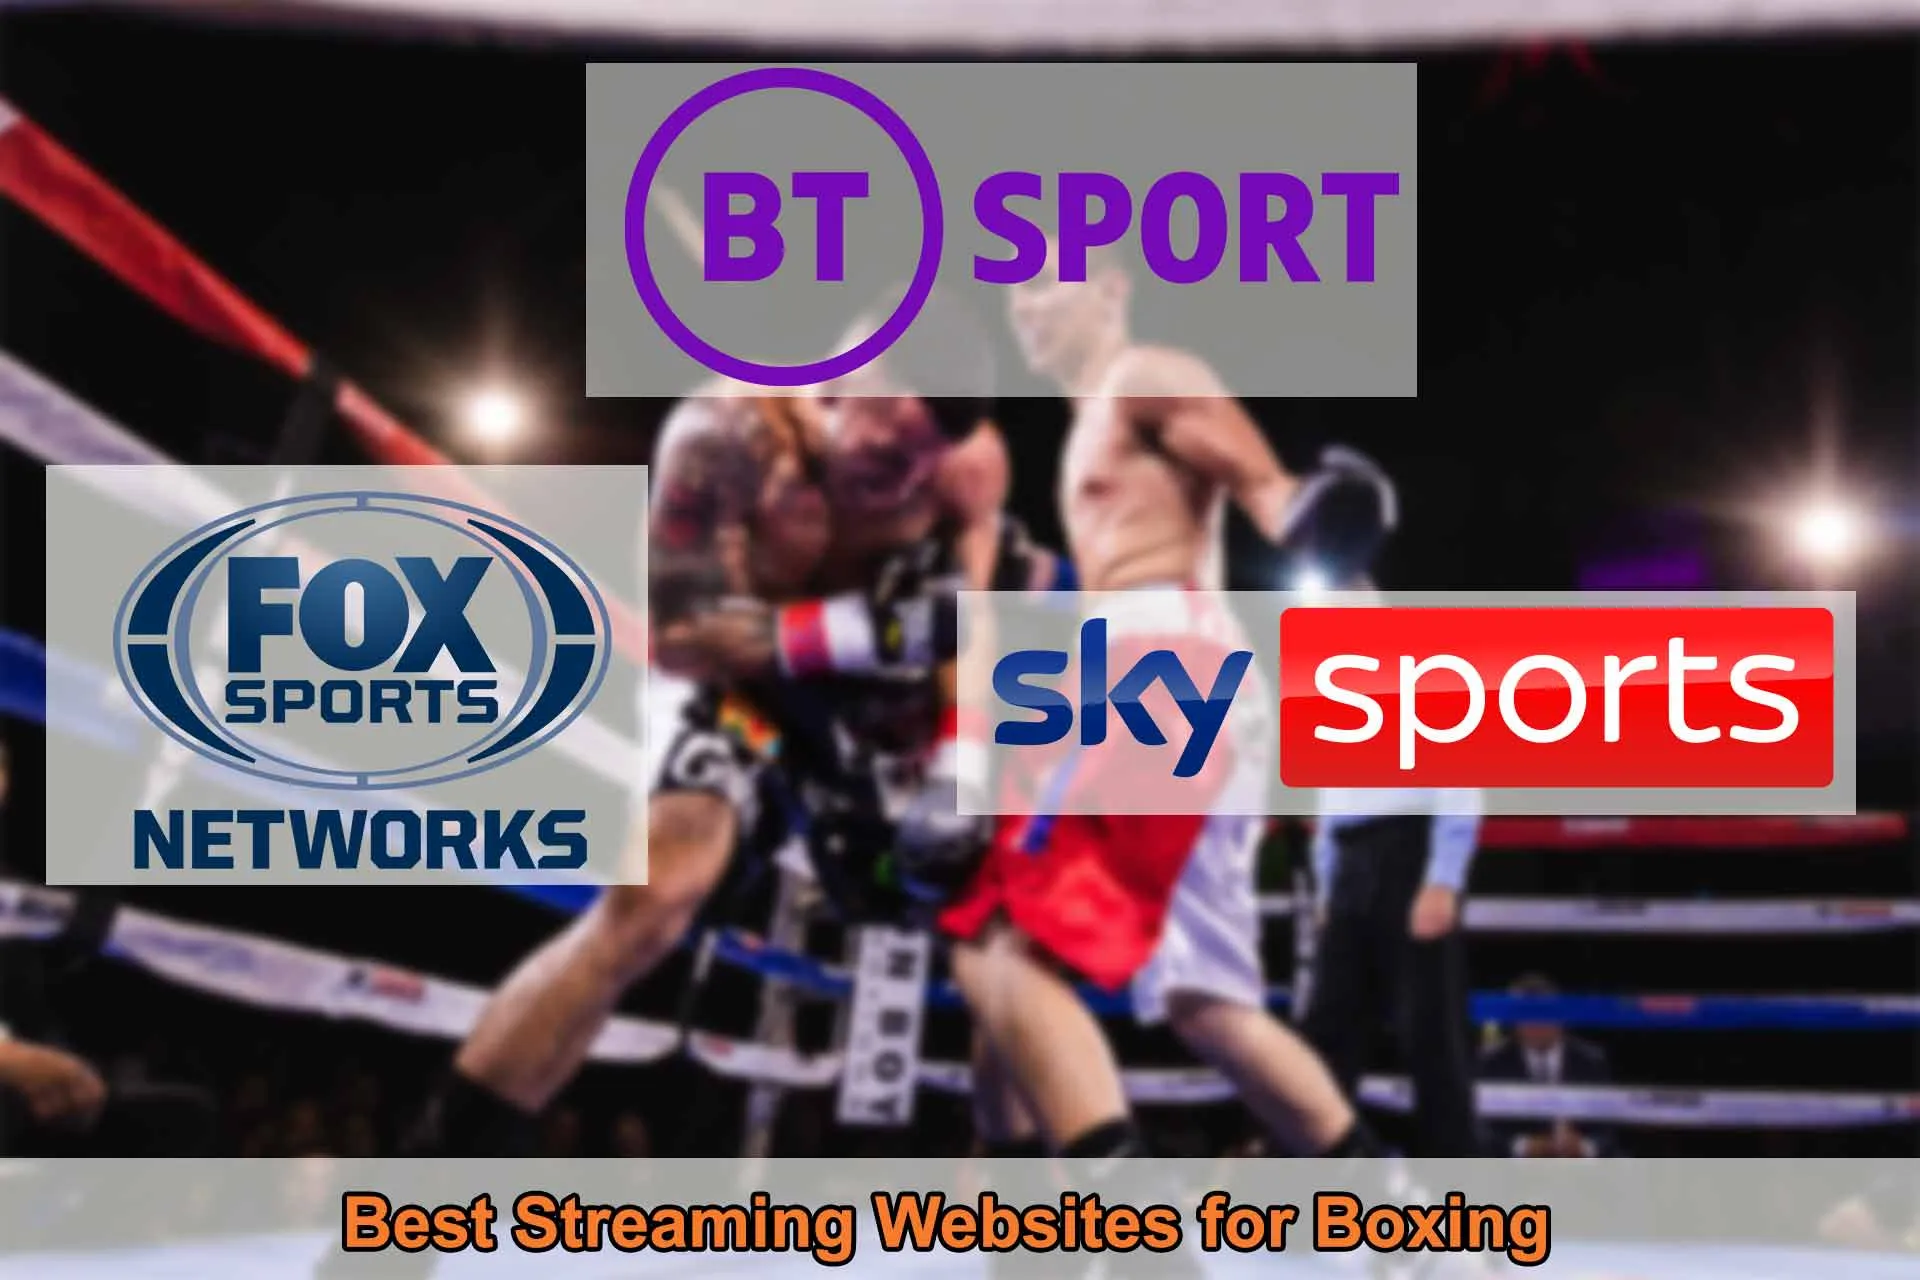 Best Streaming Websites for Boxing